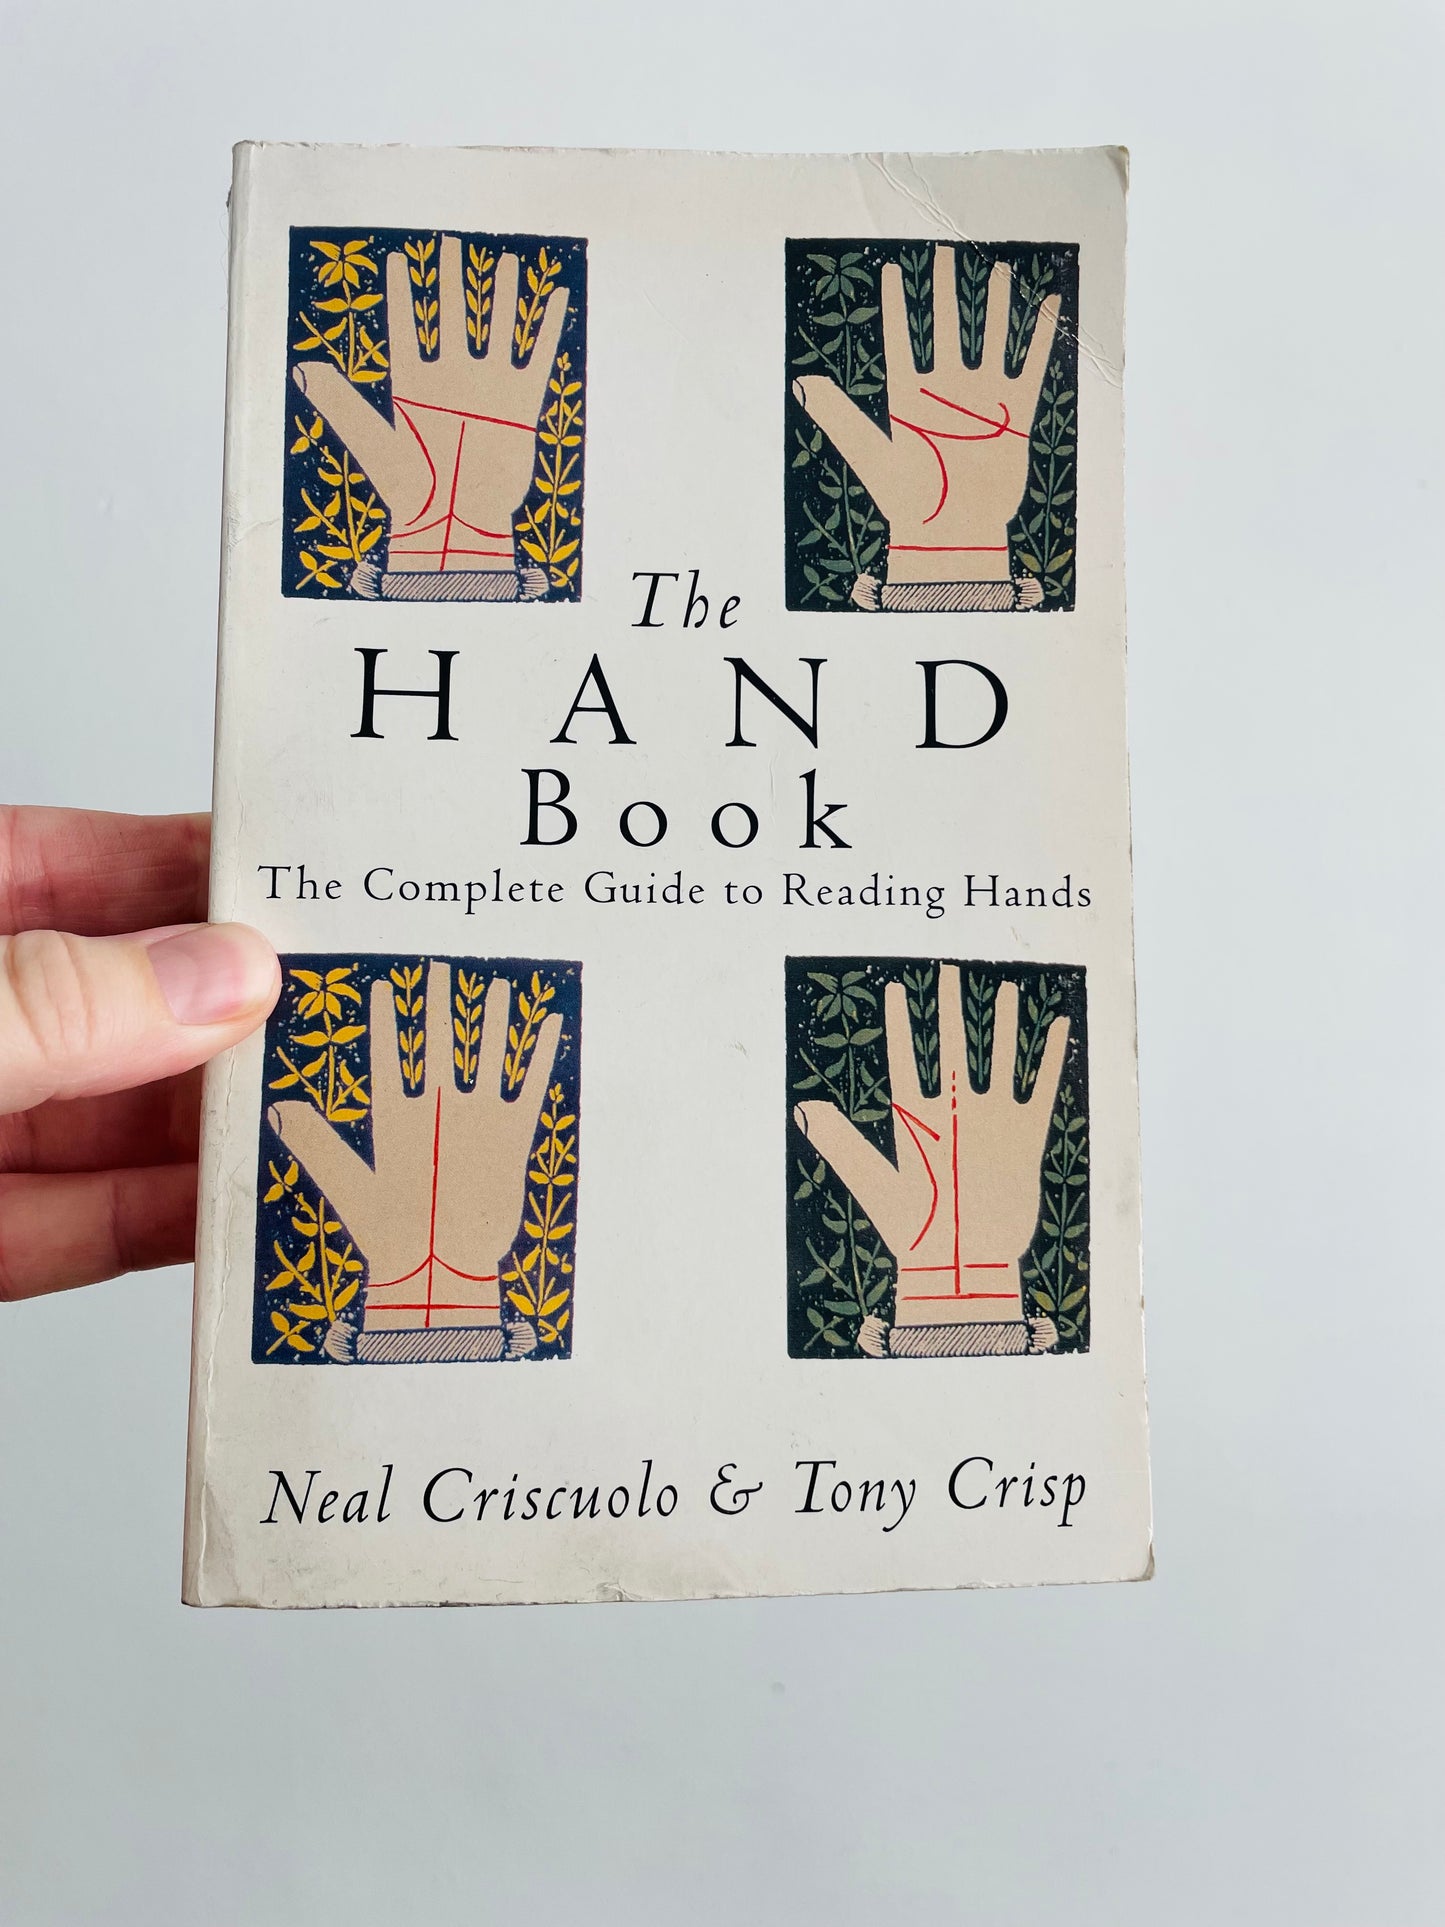 The Hand Book: The Complete Guide to Reading Hands Paperback Book by Neal Criscuolo & Tony Crisp (1994)